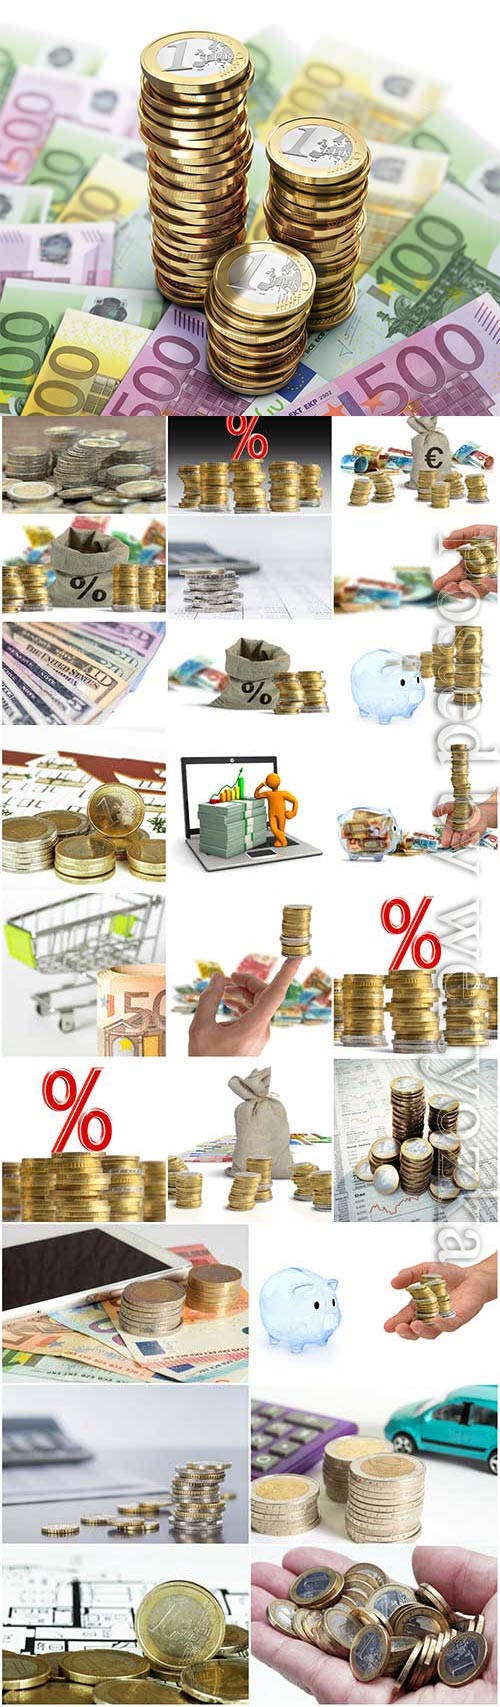 Coins and various banknotes stock photo